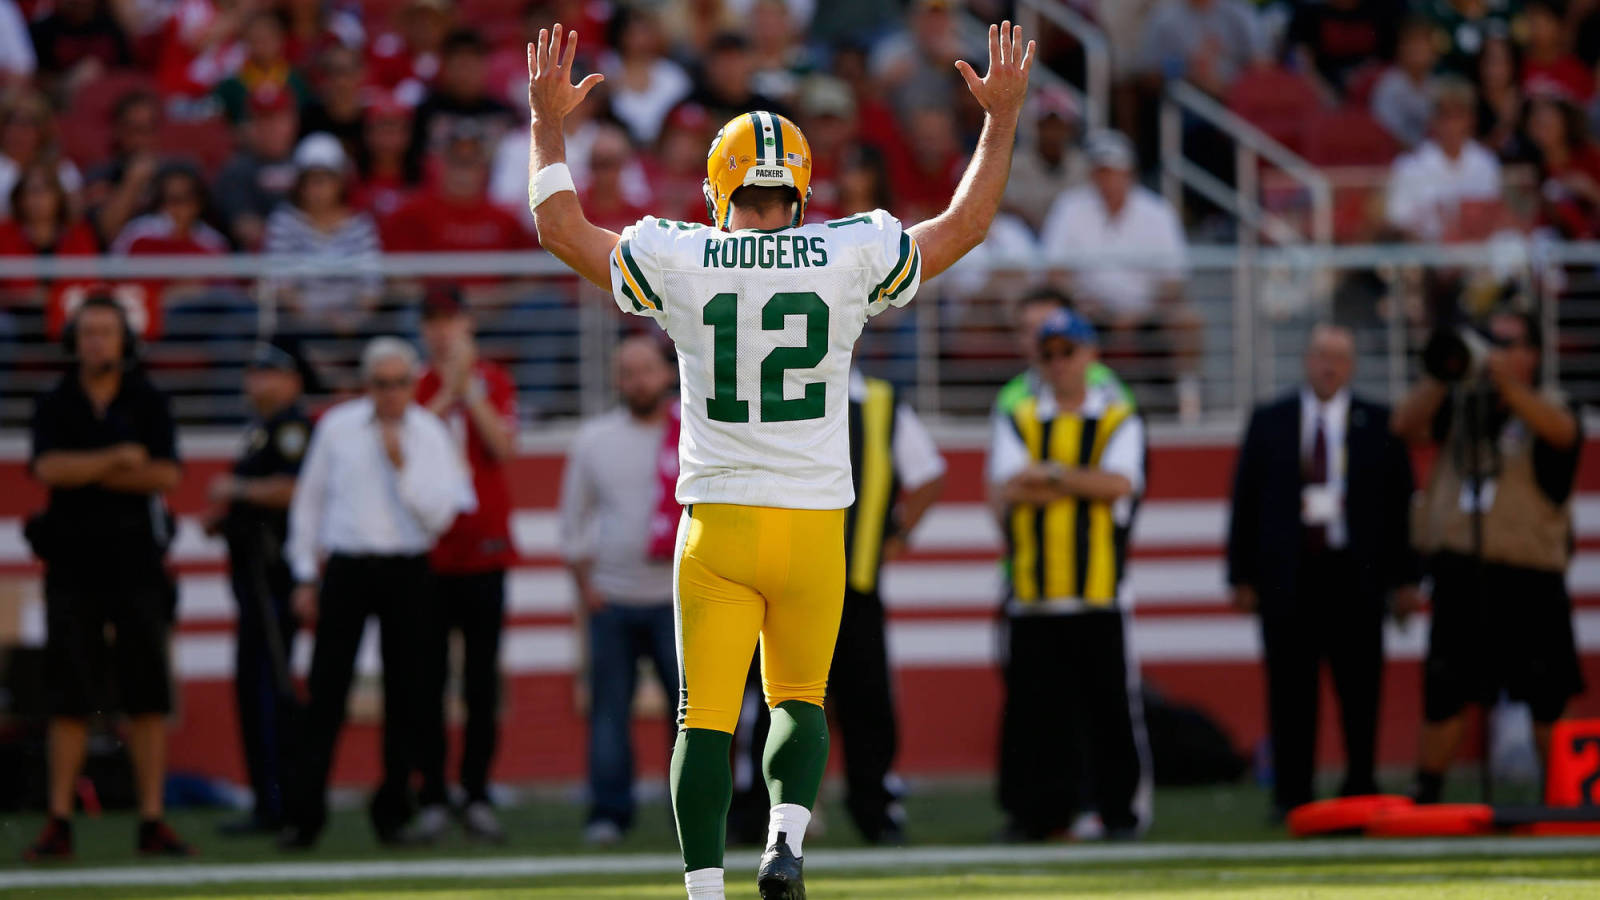 Aaron Rodgers set to pass Johnny Unitas as fastest QB to 30,000 yards